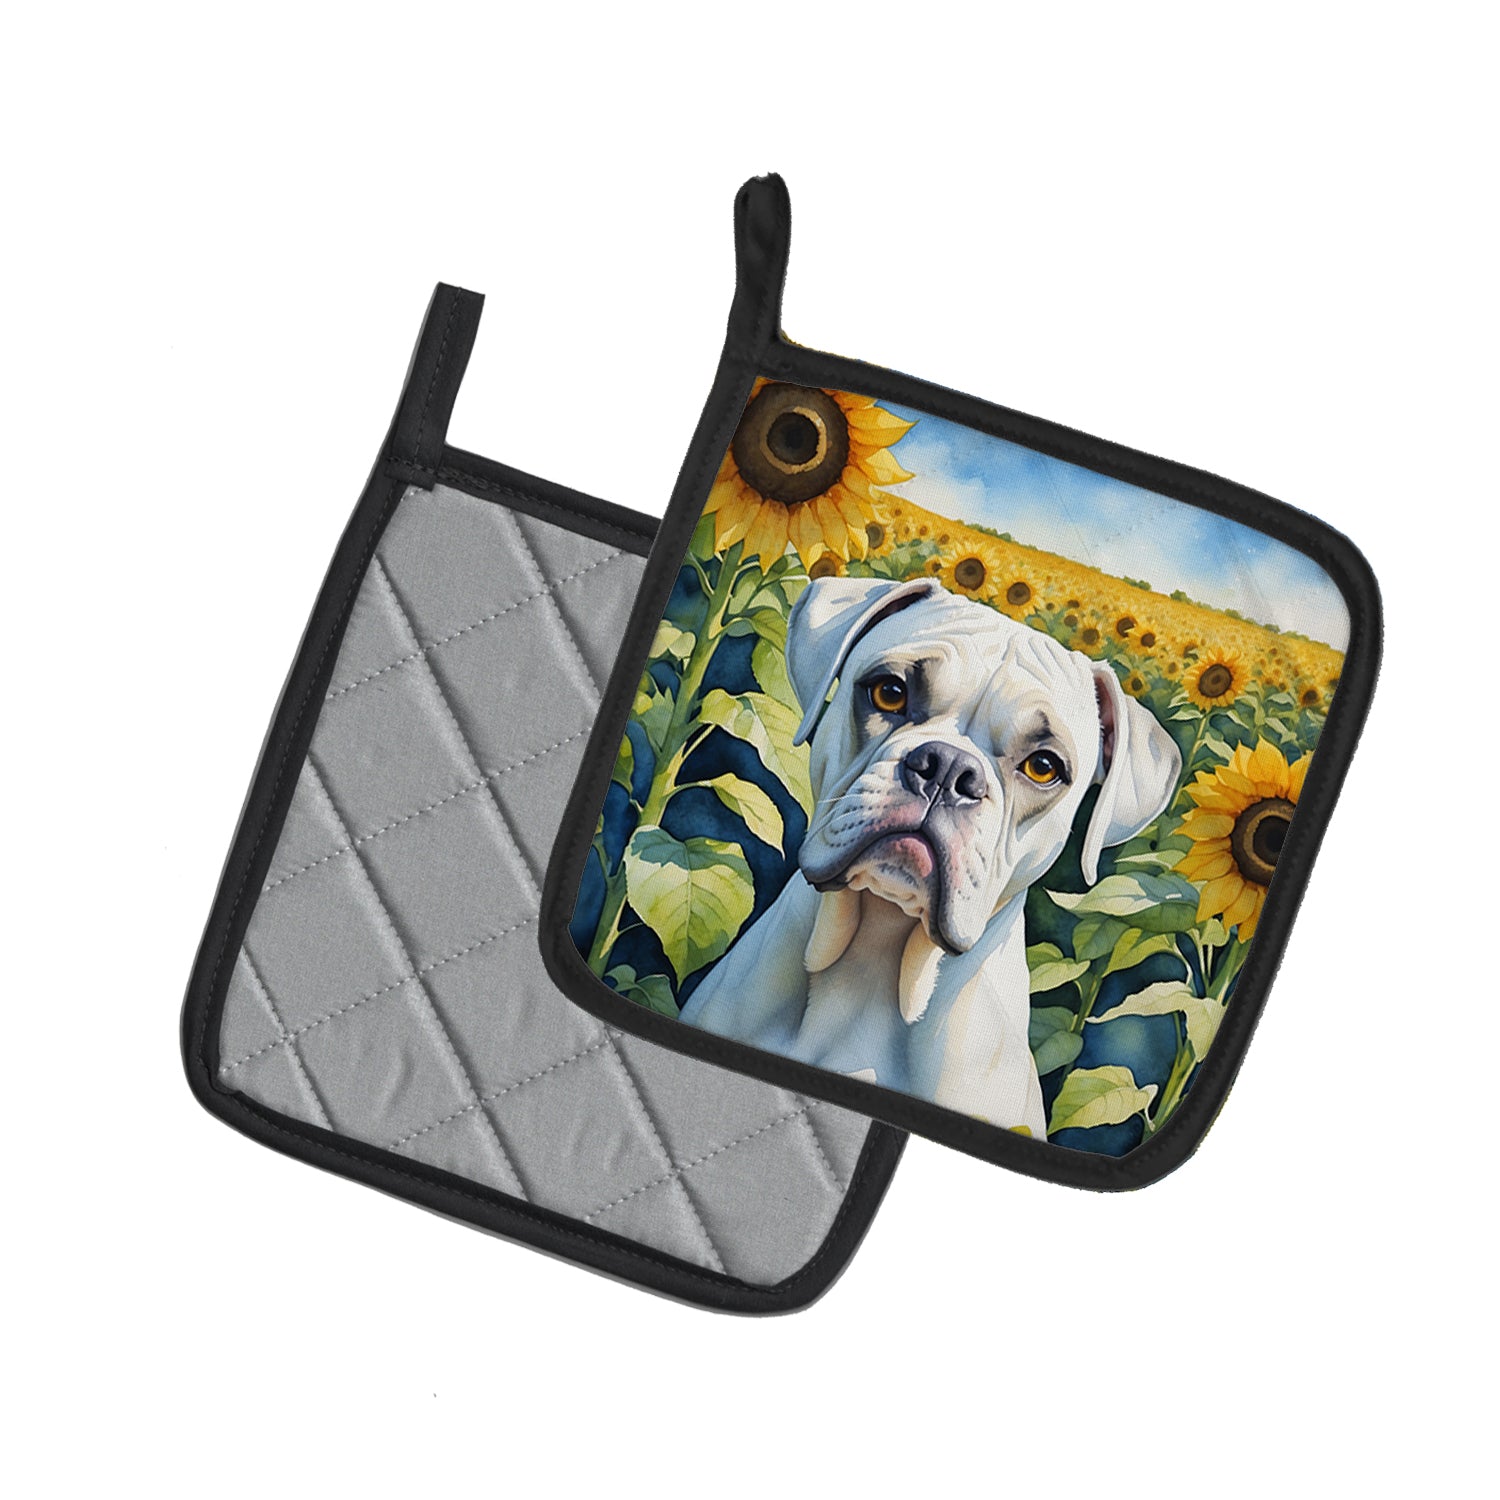 Buy this Boxer in Sunflowers Pair of Pot Holders